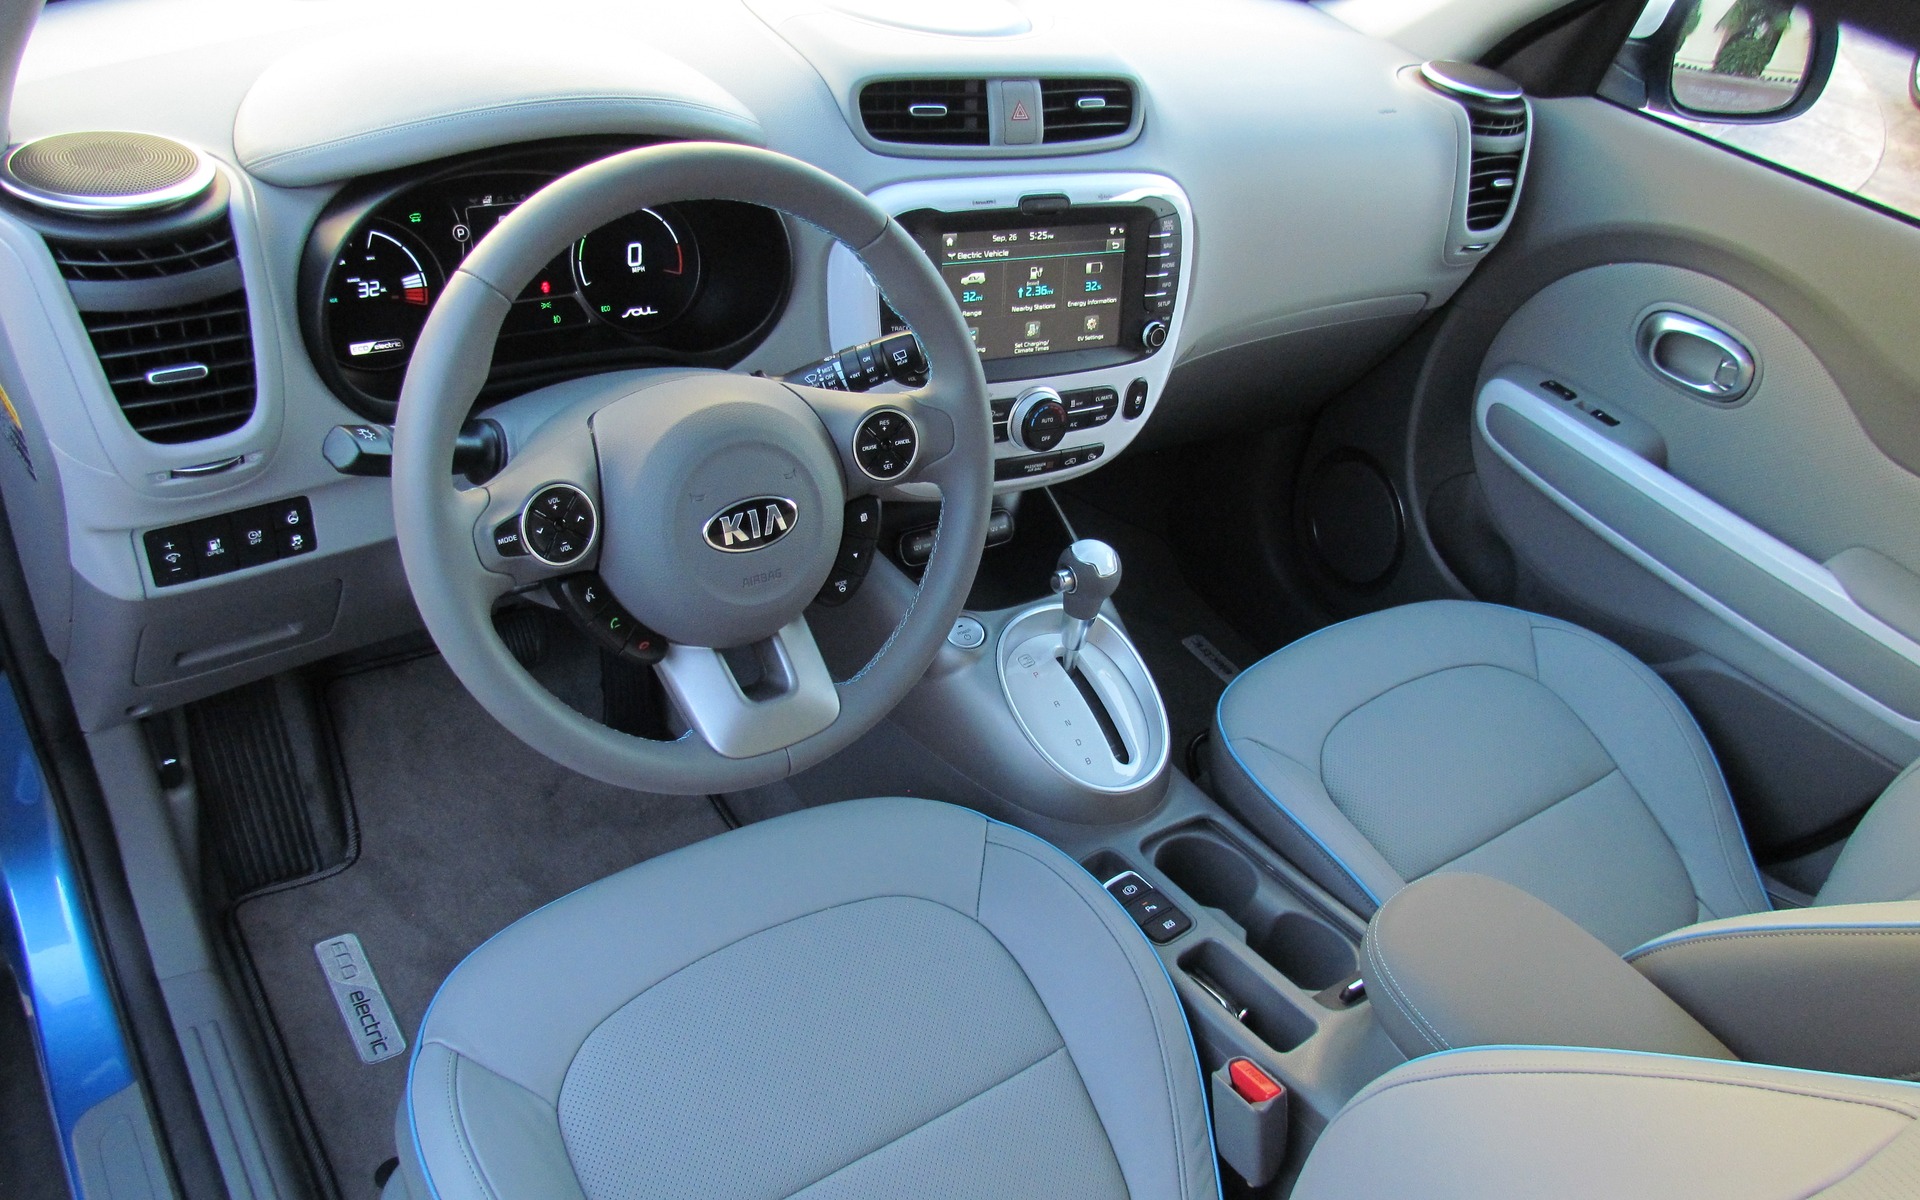 The interior differs little from a normal car, with a familiar layout.